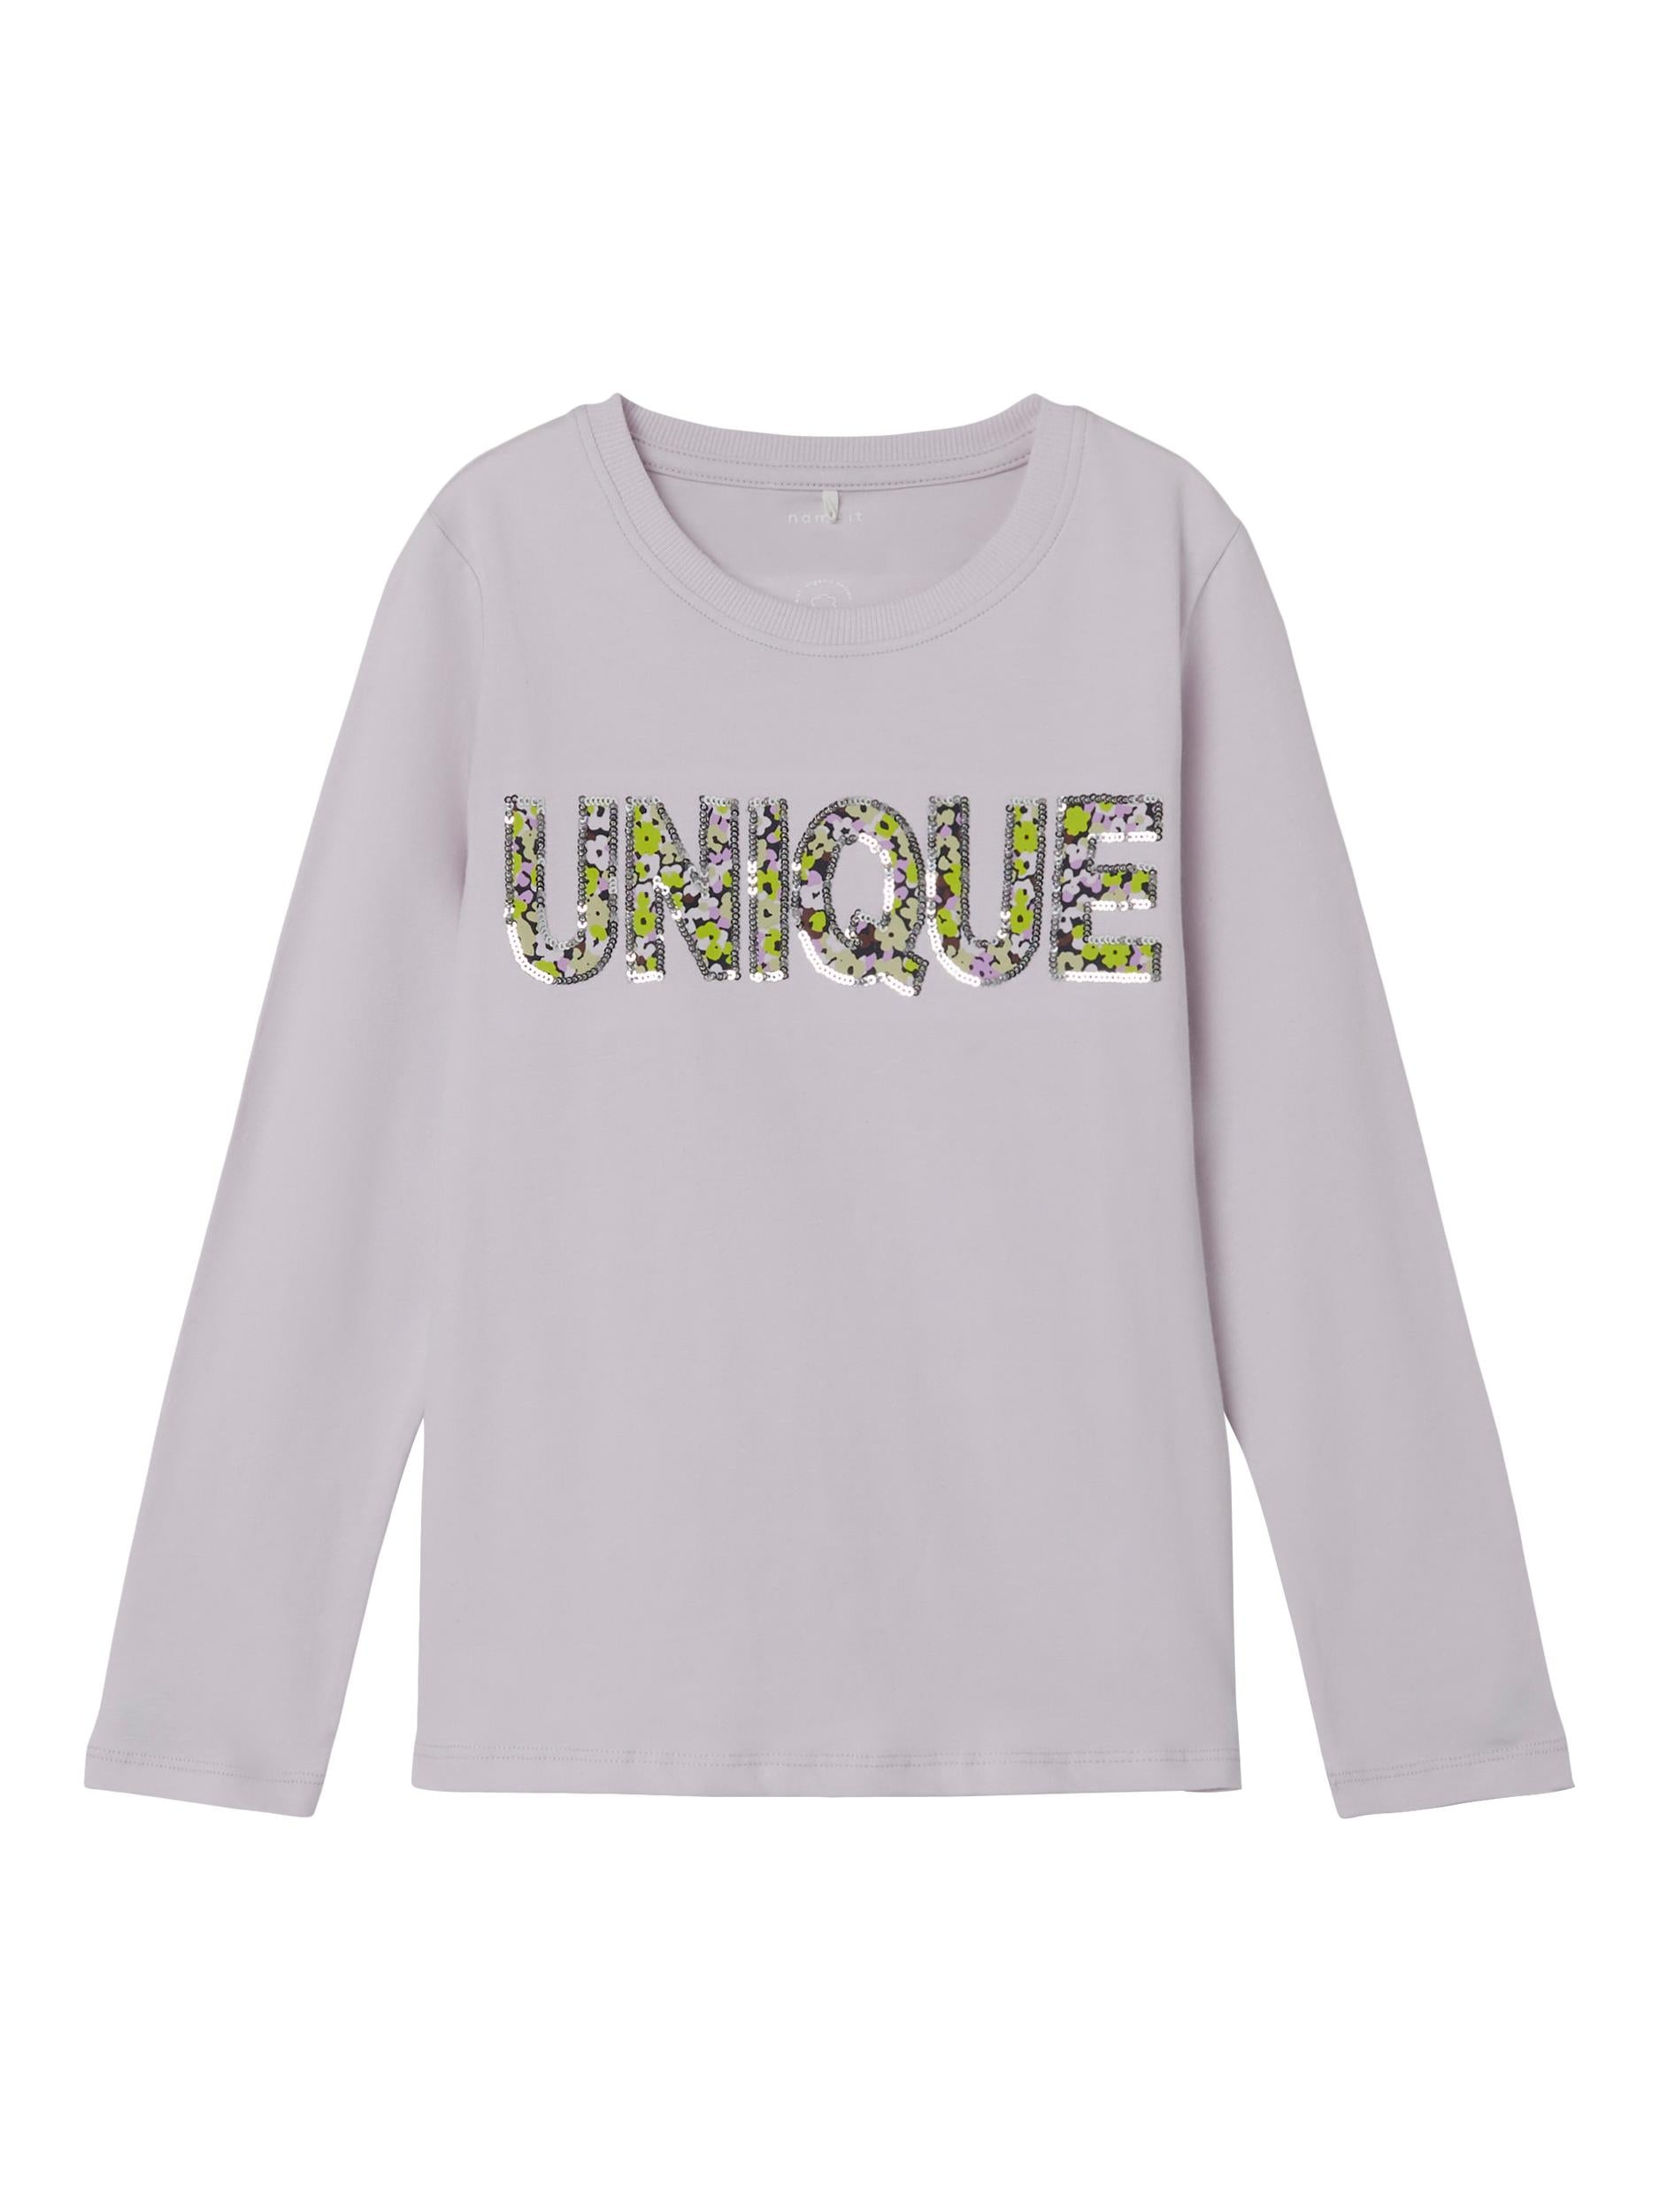 Girl's Kafammi Long Sleeve Top - Orchid Hush-Front View